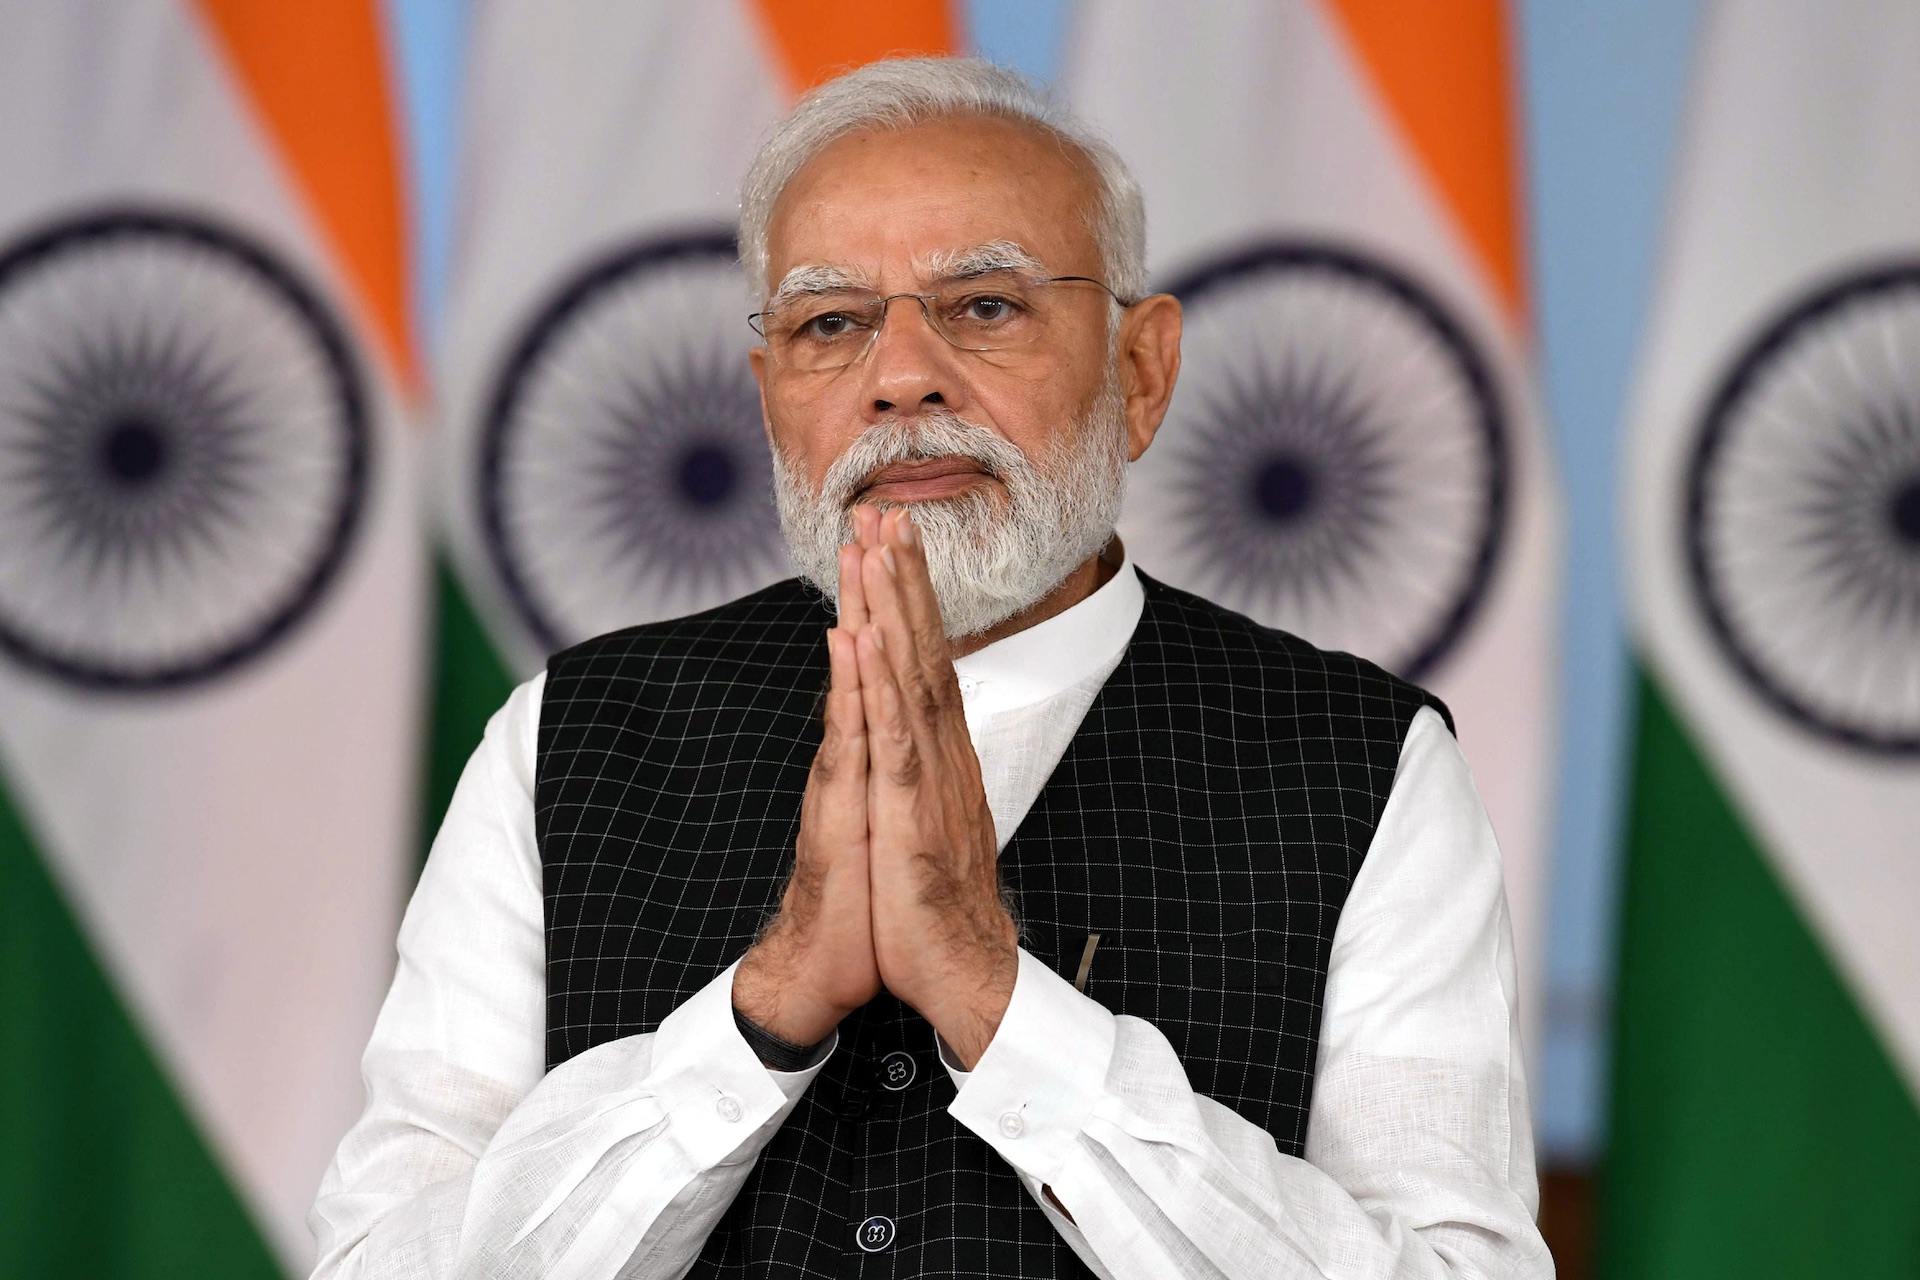 PM Modi will travel to Germany, Denmark, and France in May